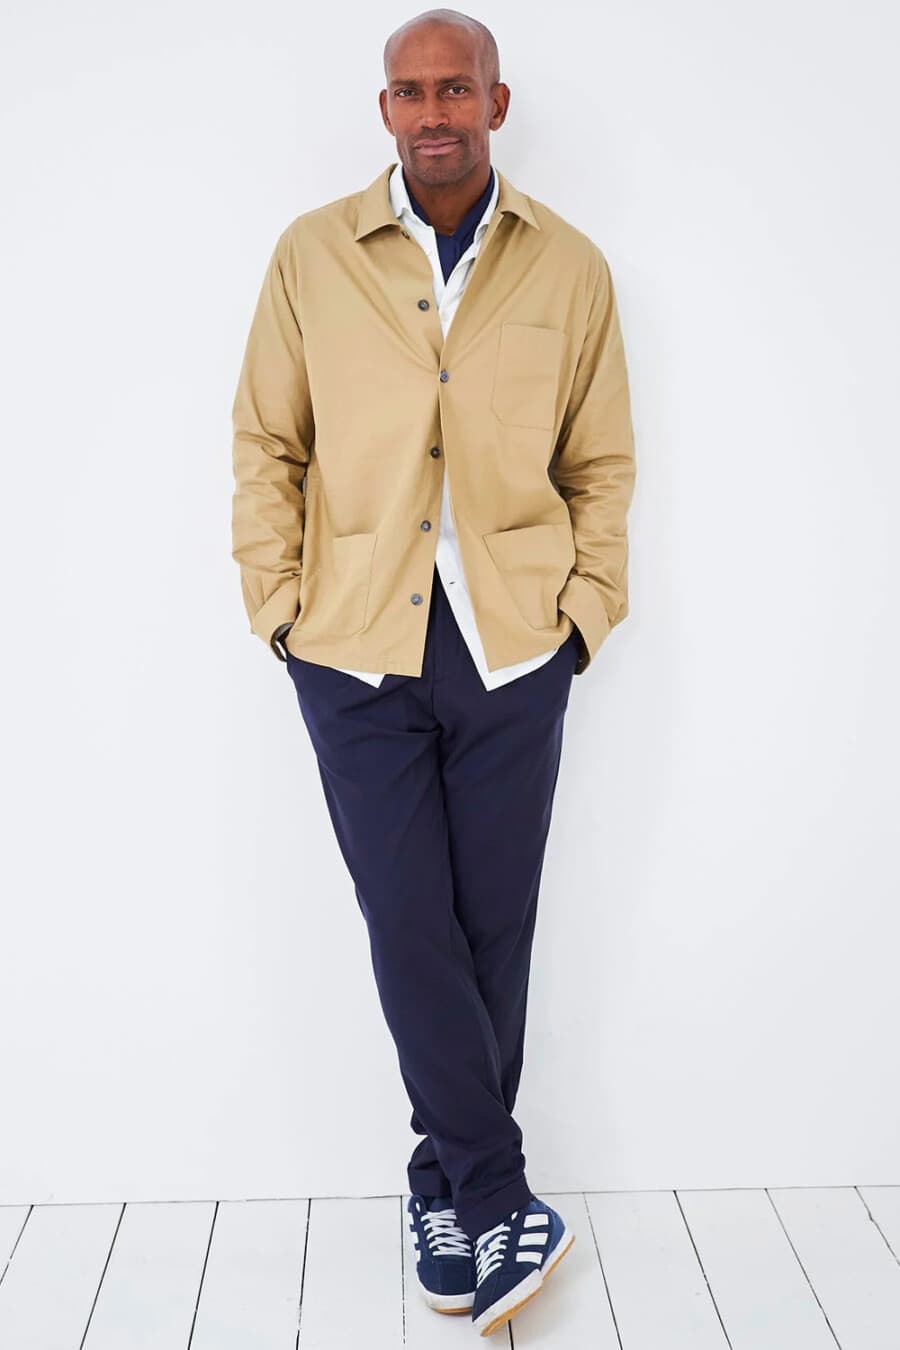 Men's navy chino pants, white shirt, beige cotton shacket and blue adidas Gazelle sneakers outfit